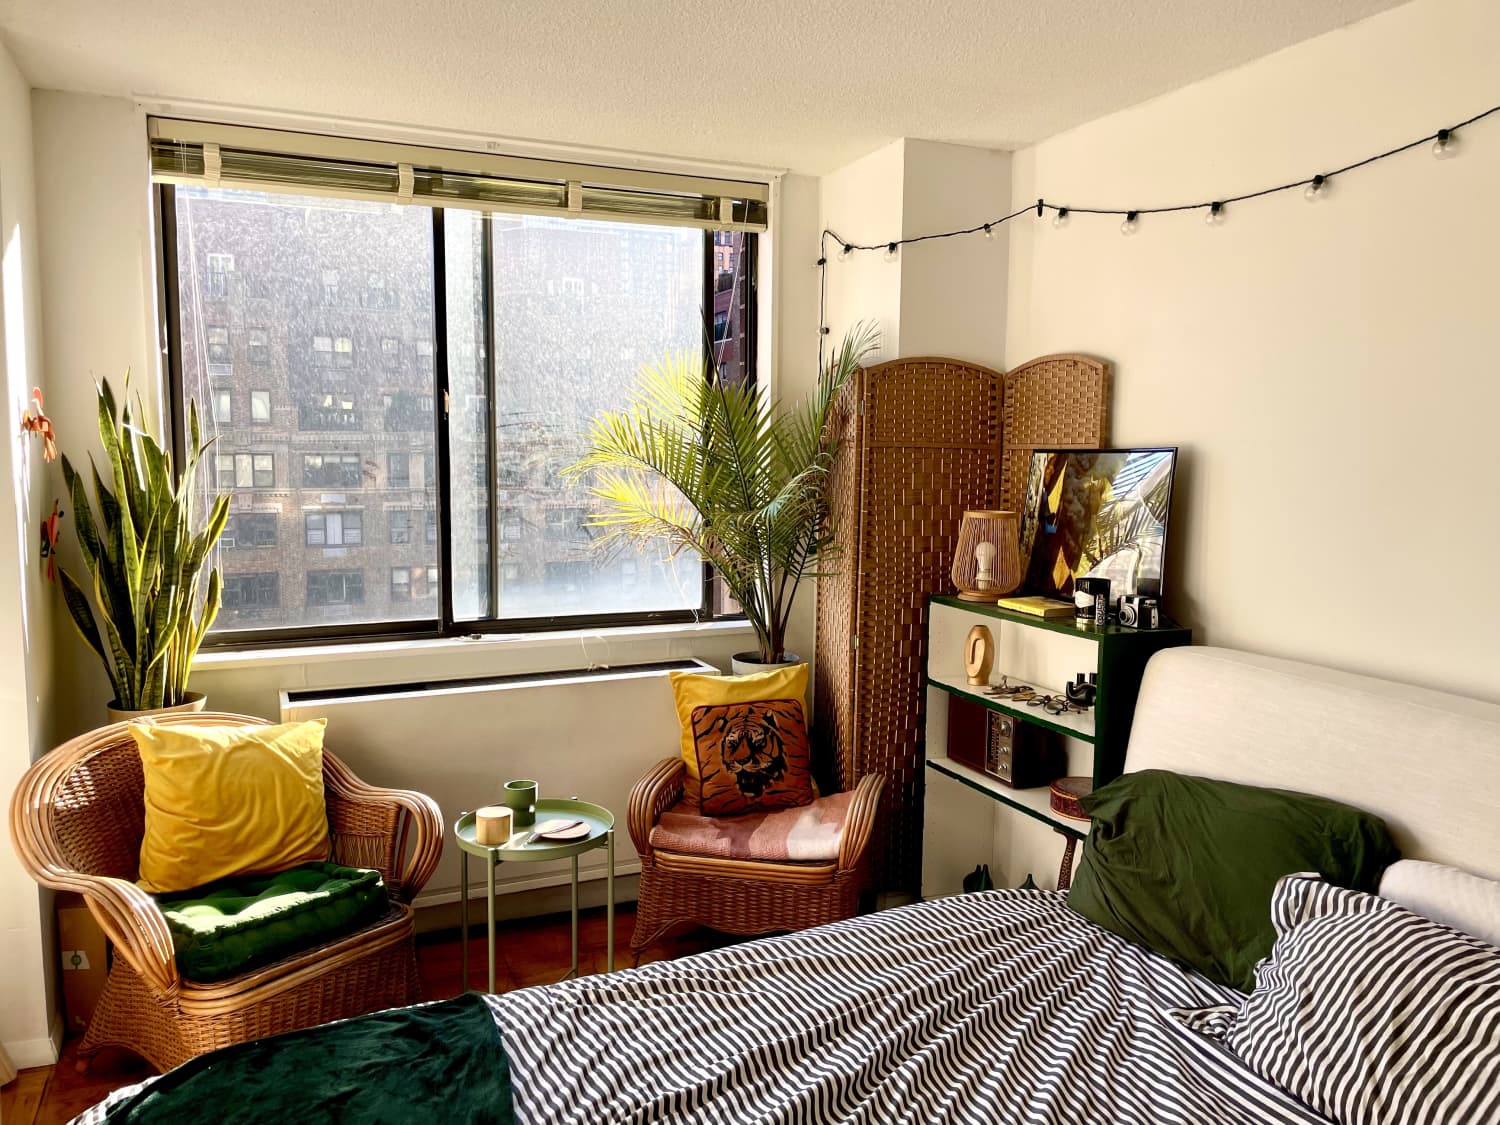 12 Ultra-Cool Bedroom Ideas That Will Inspire Your Next Project